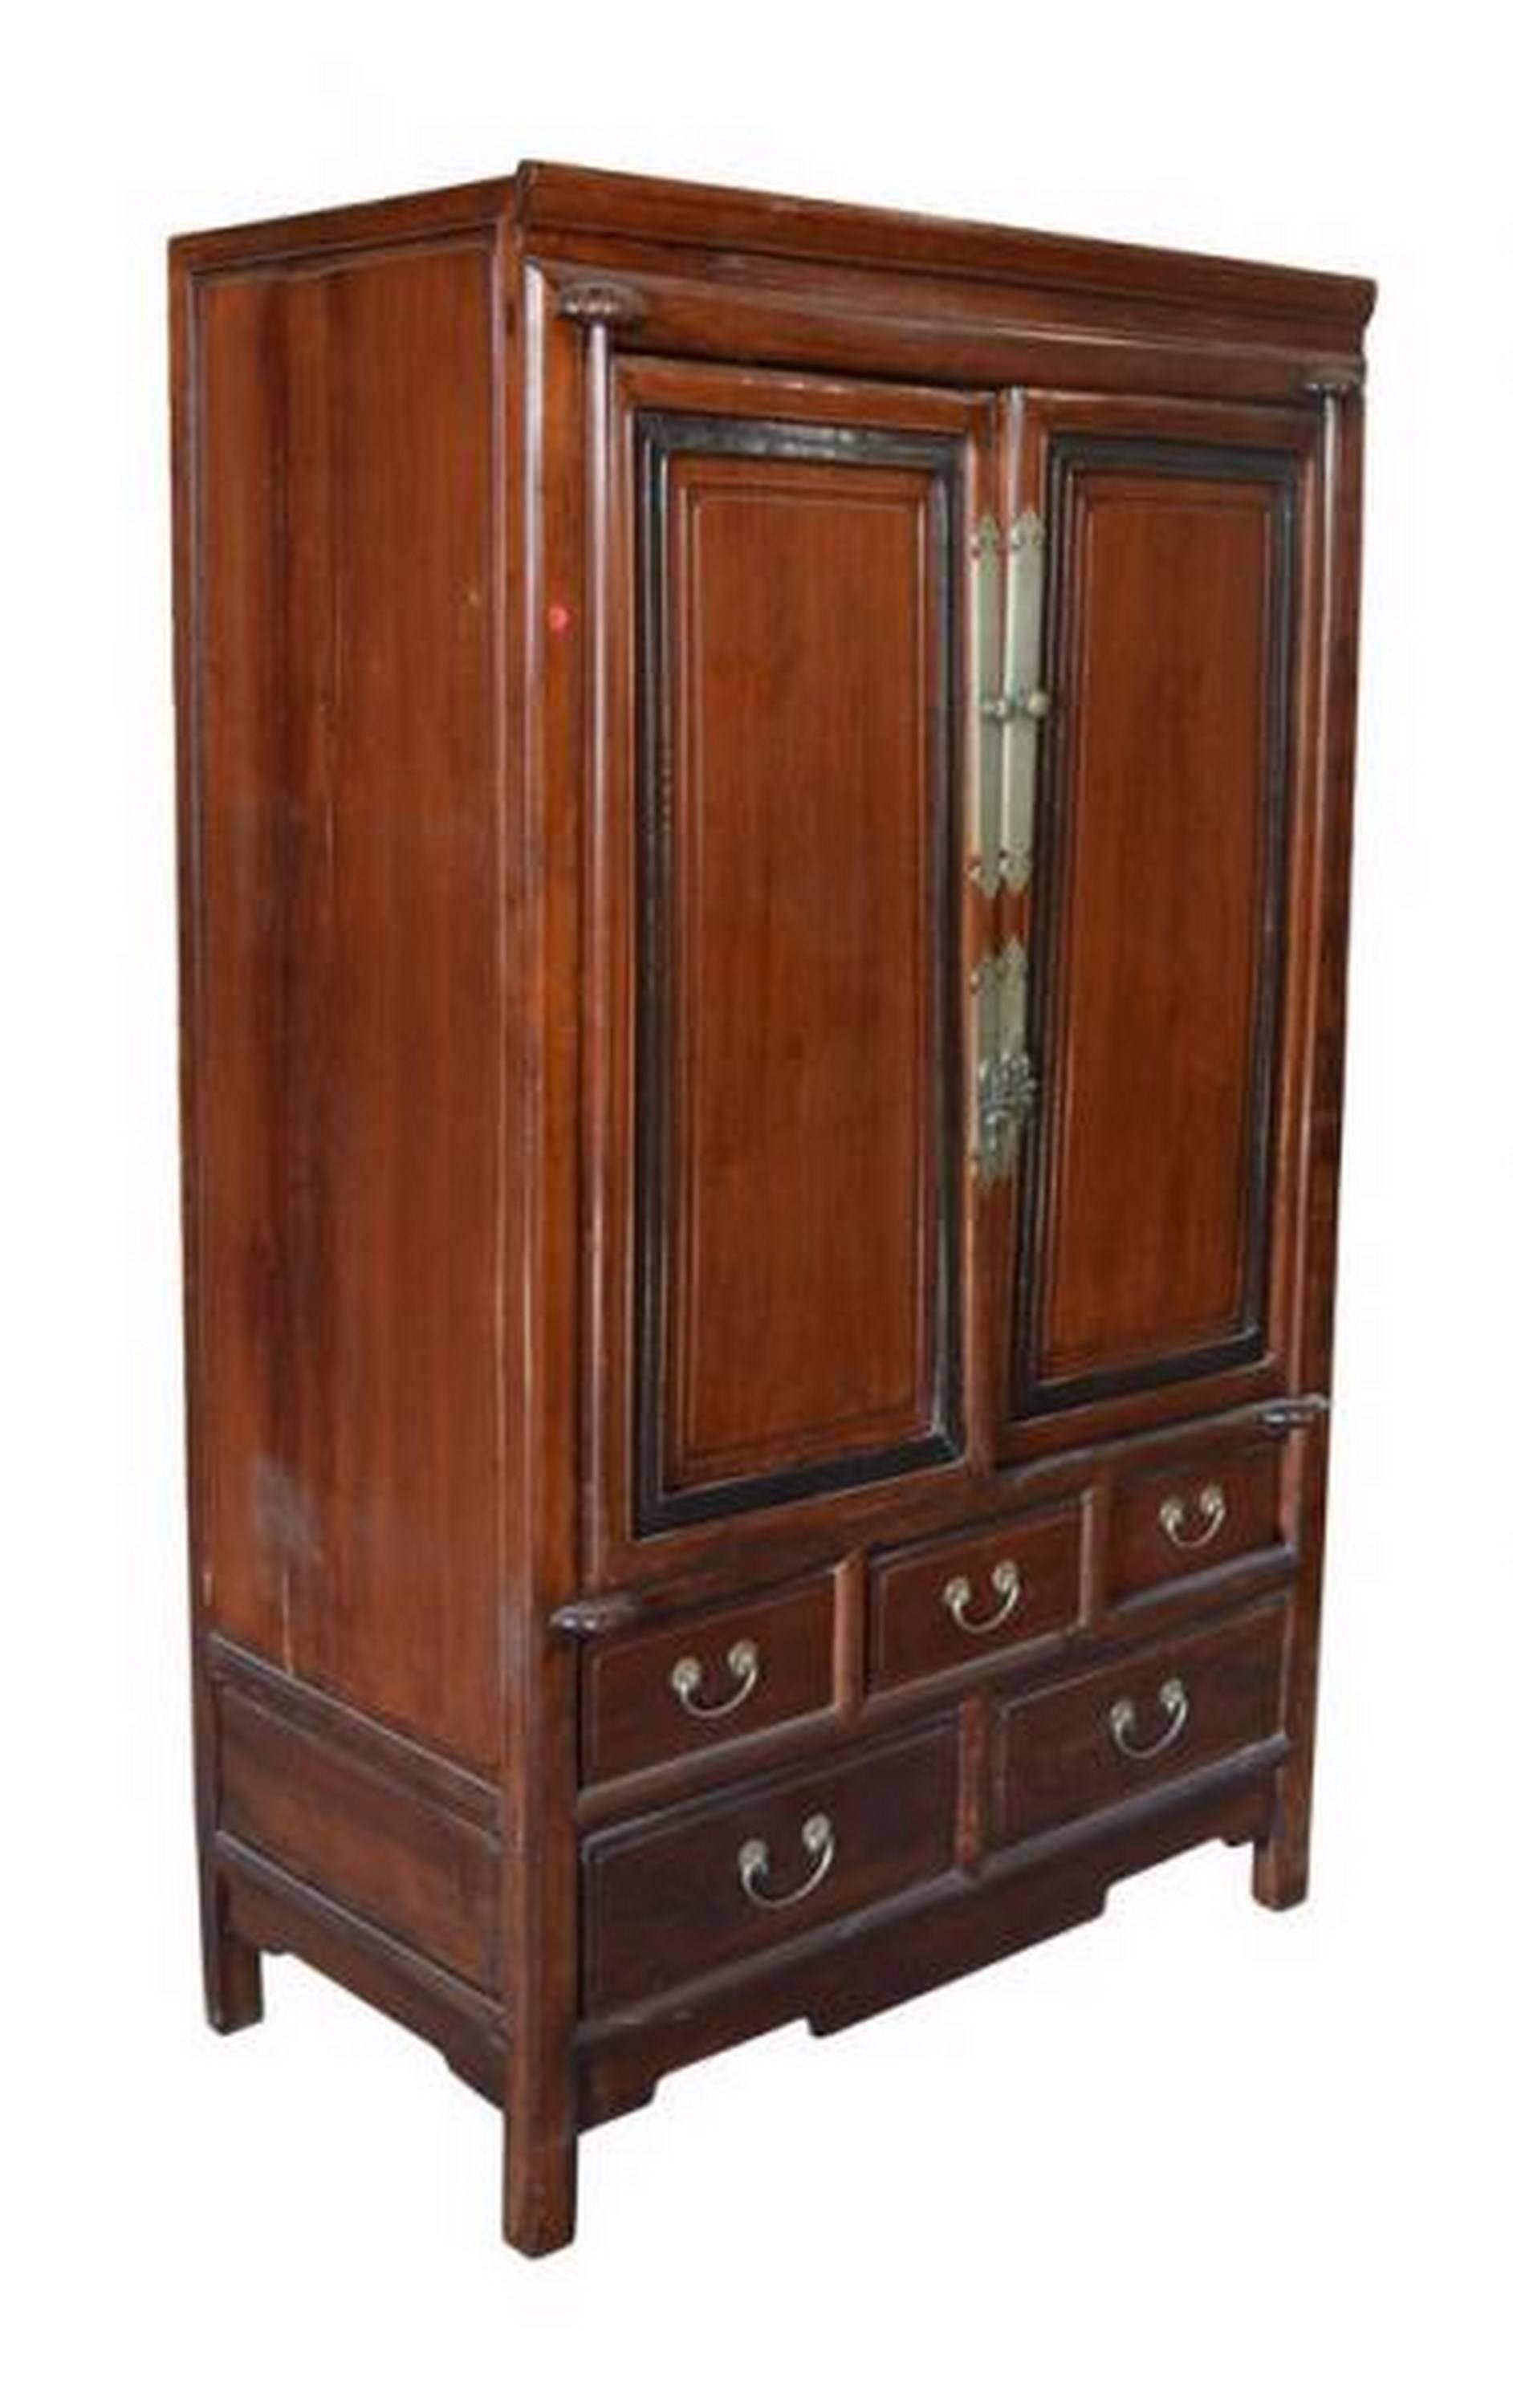 A Chinese mid-19th century cabinet made with lacquered blackwood and rosewood. This tall cabinet adopts a rectangular shape and features the contrasting details of rosewood and blackwood. The front features two doors with carved brass pulls on